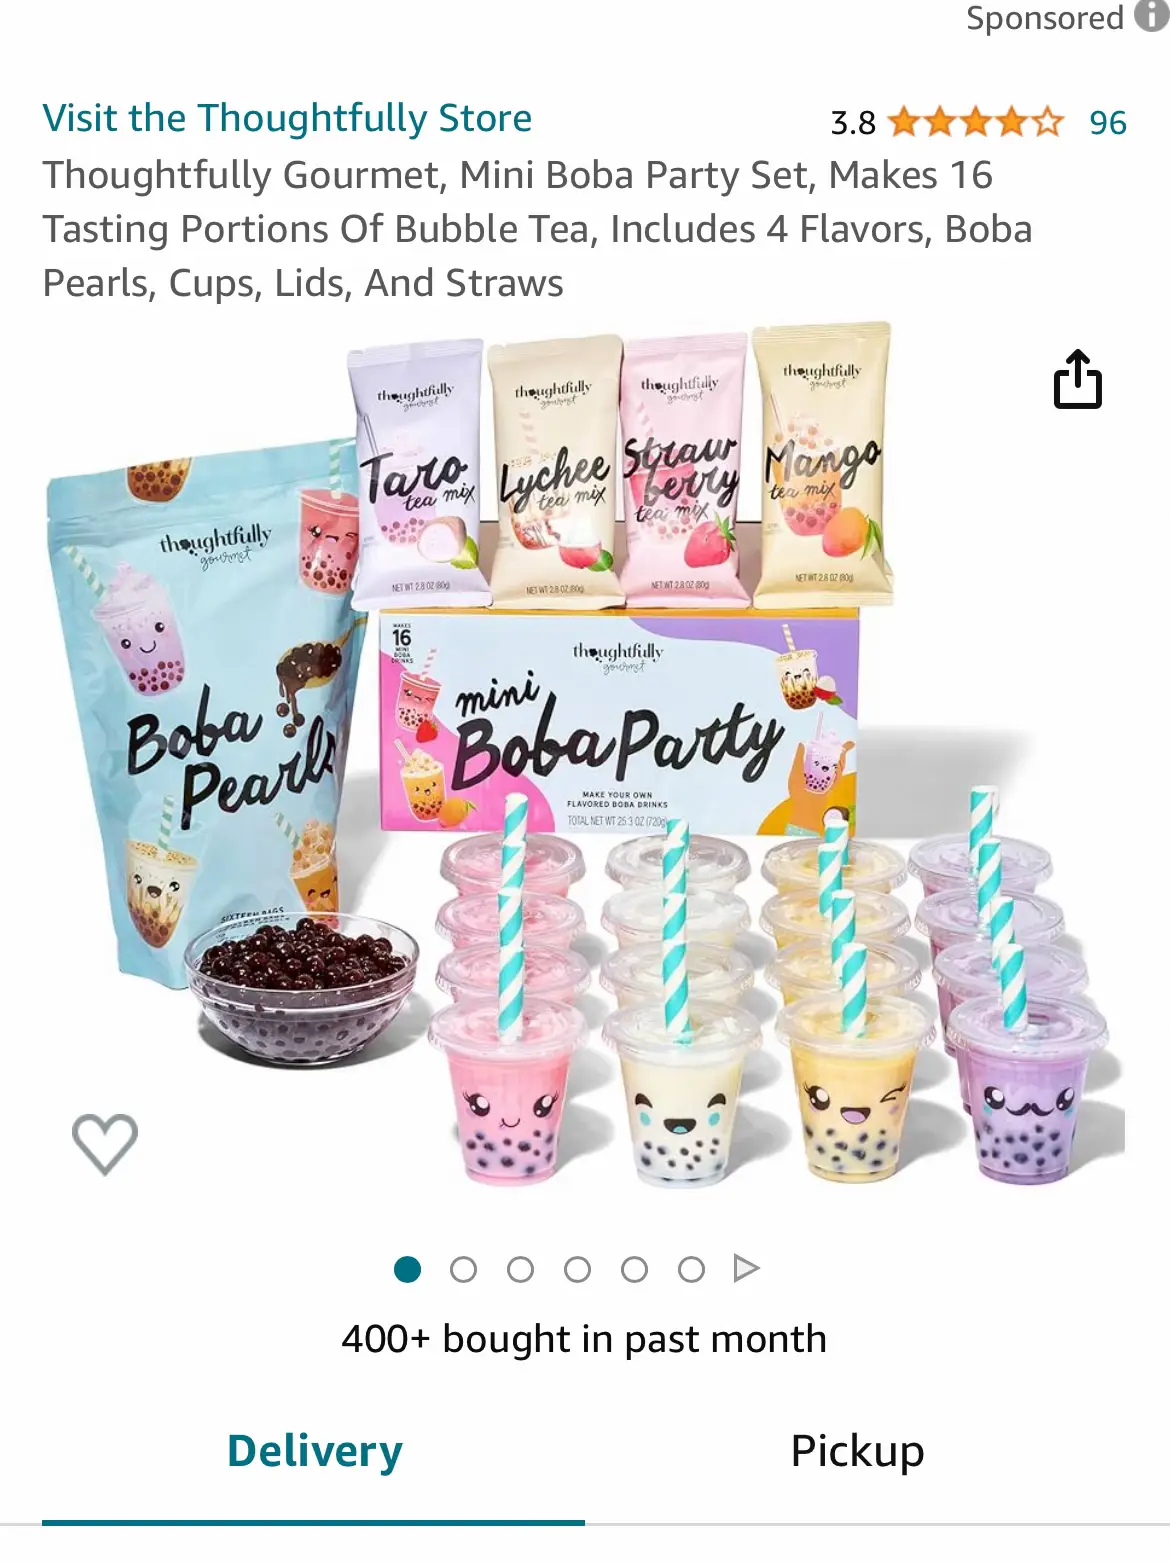 Thoughtfully Gourmet, Mini Boba Party Set, Makes 16 Tasting Portions Of  Bubble Tea, Includes 4 Flavors, Boba Pearls, Cups, Lids, And Straws